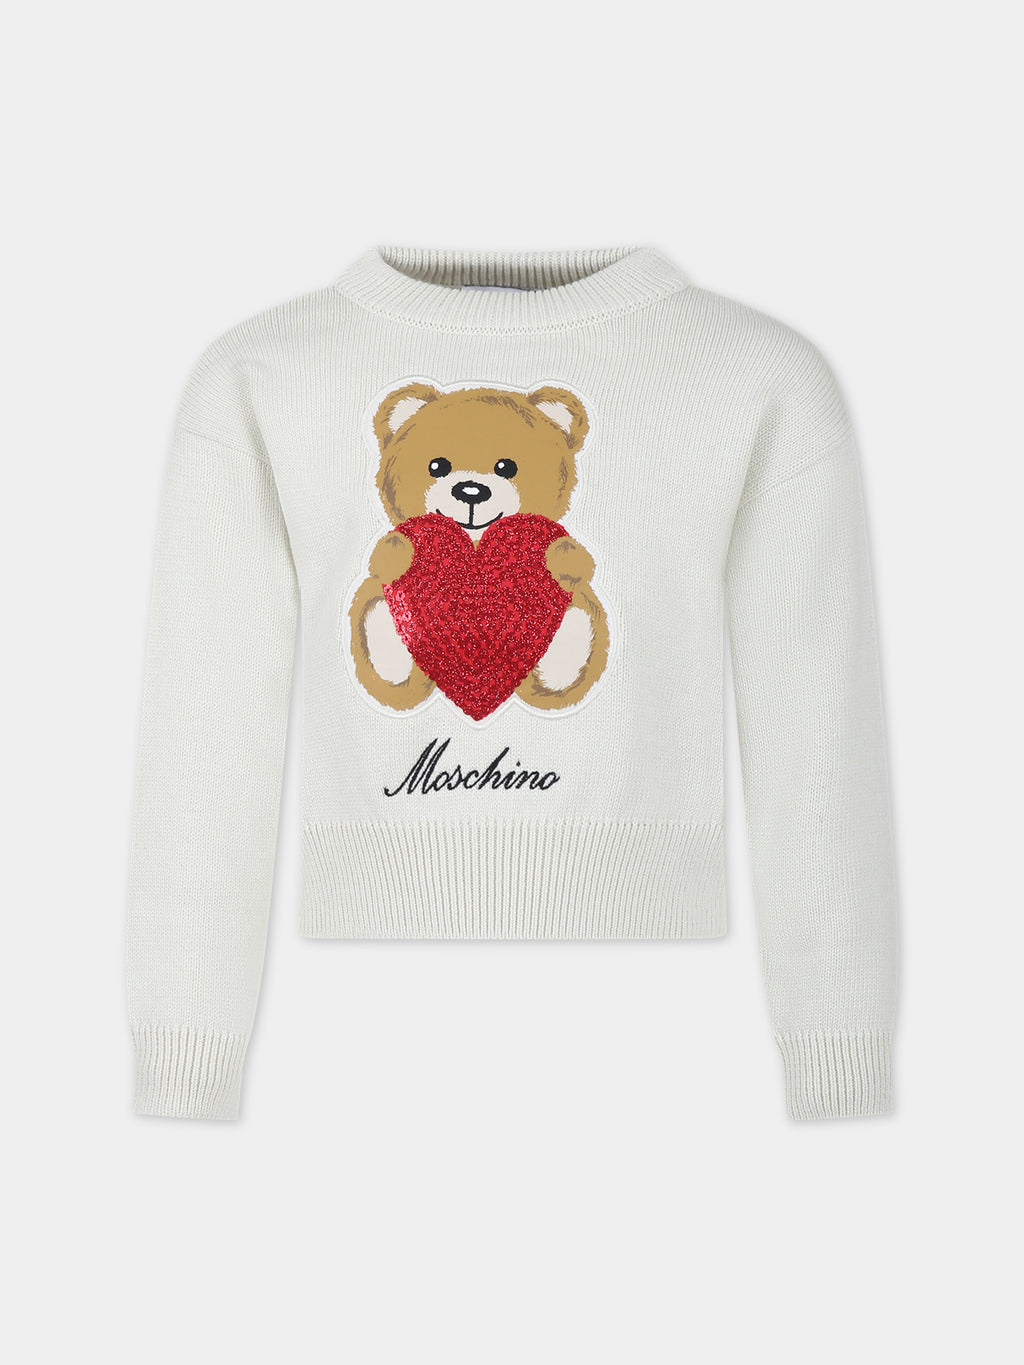 White sweater for girl with Teddy Bear and heart